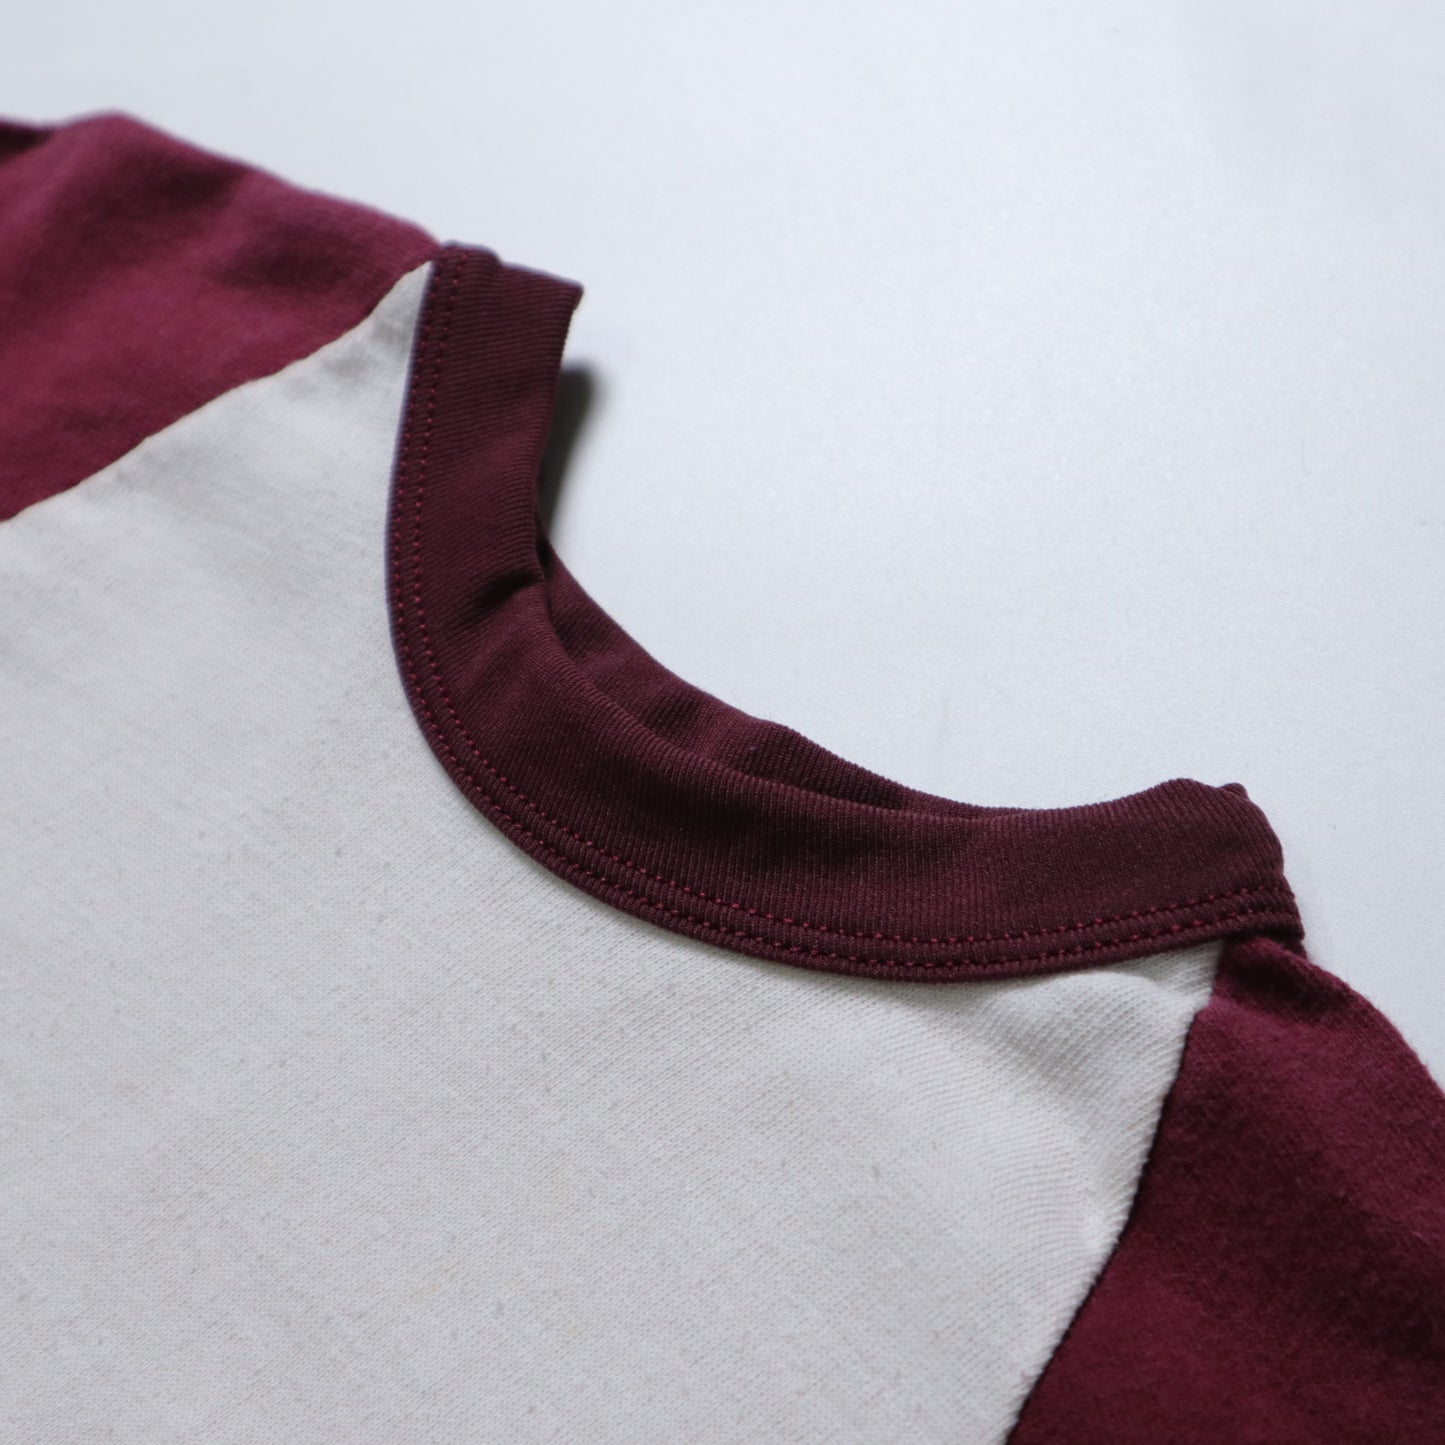 1981 American-made RUSSELL 3/4-sleeve color-blocked baseball top